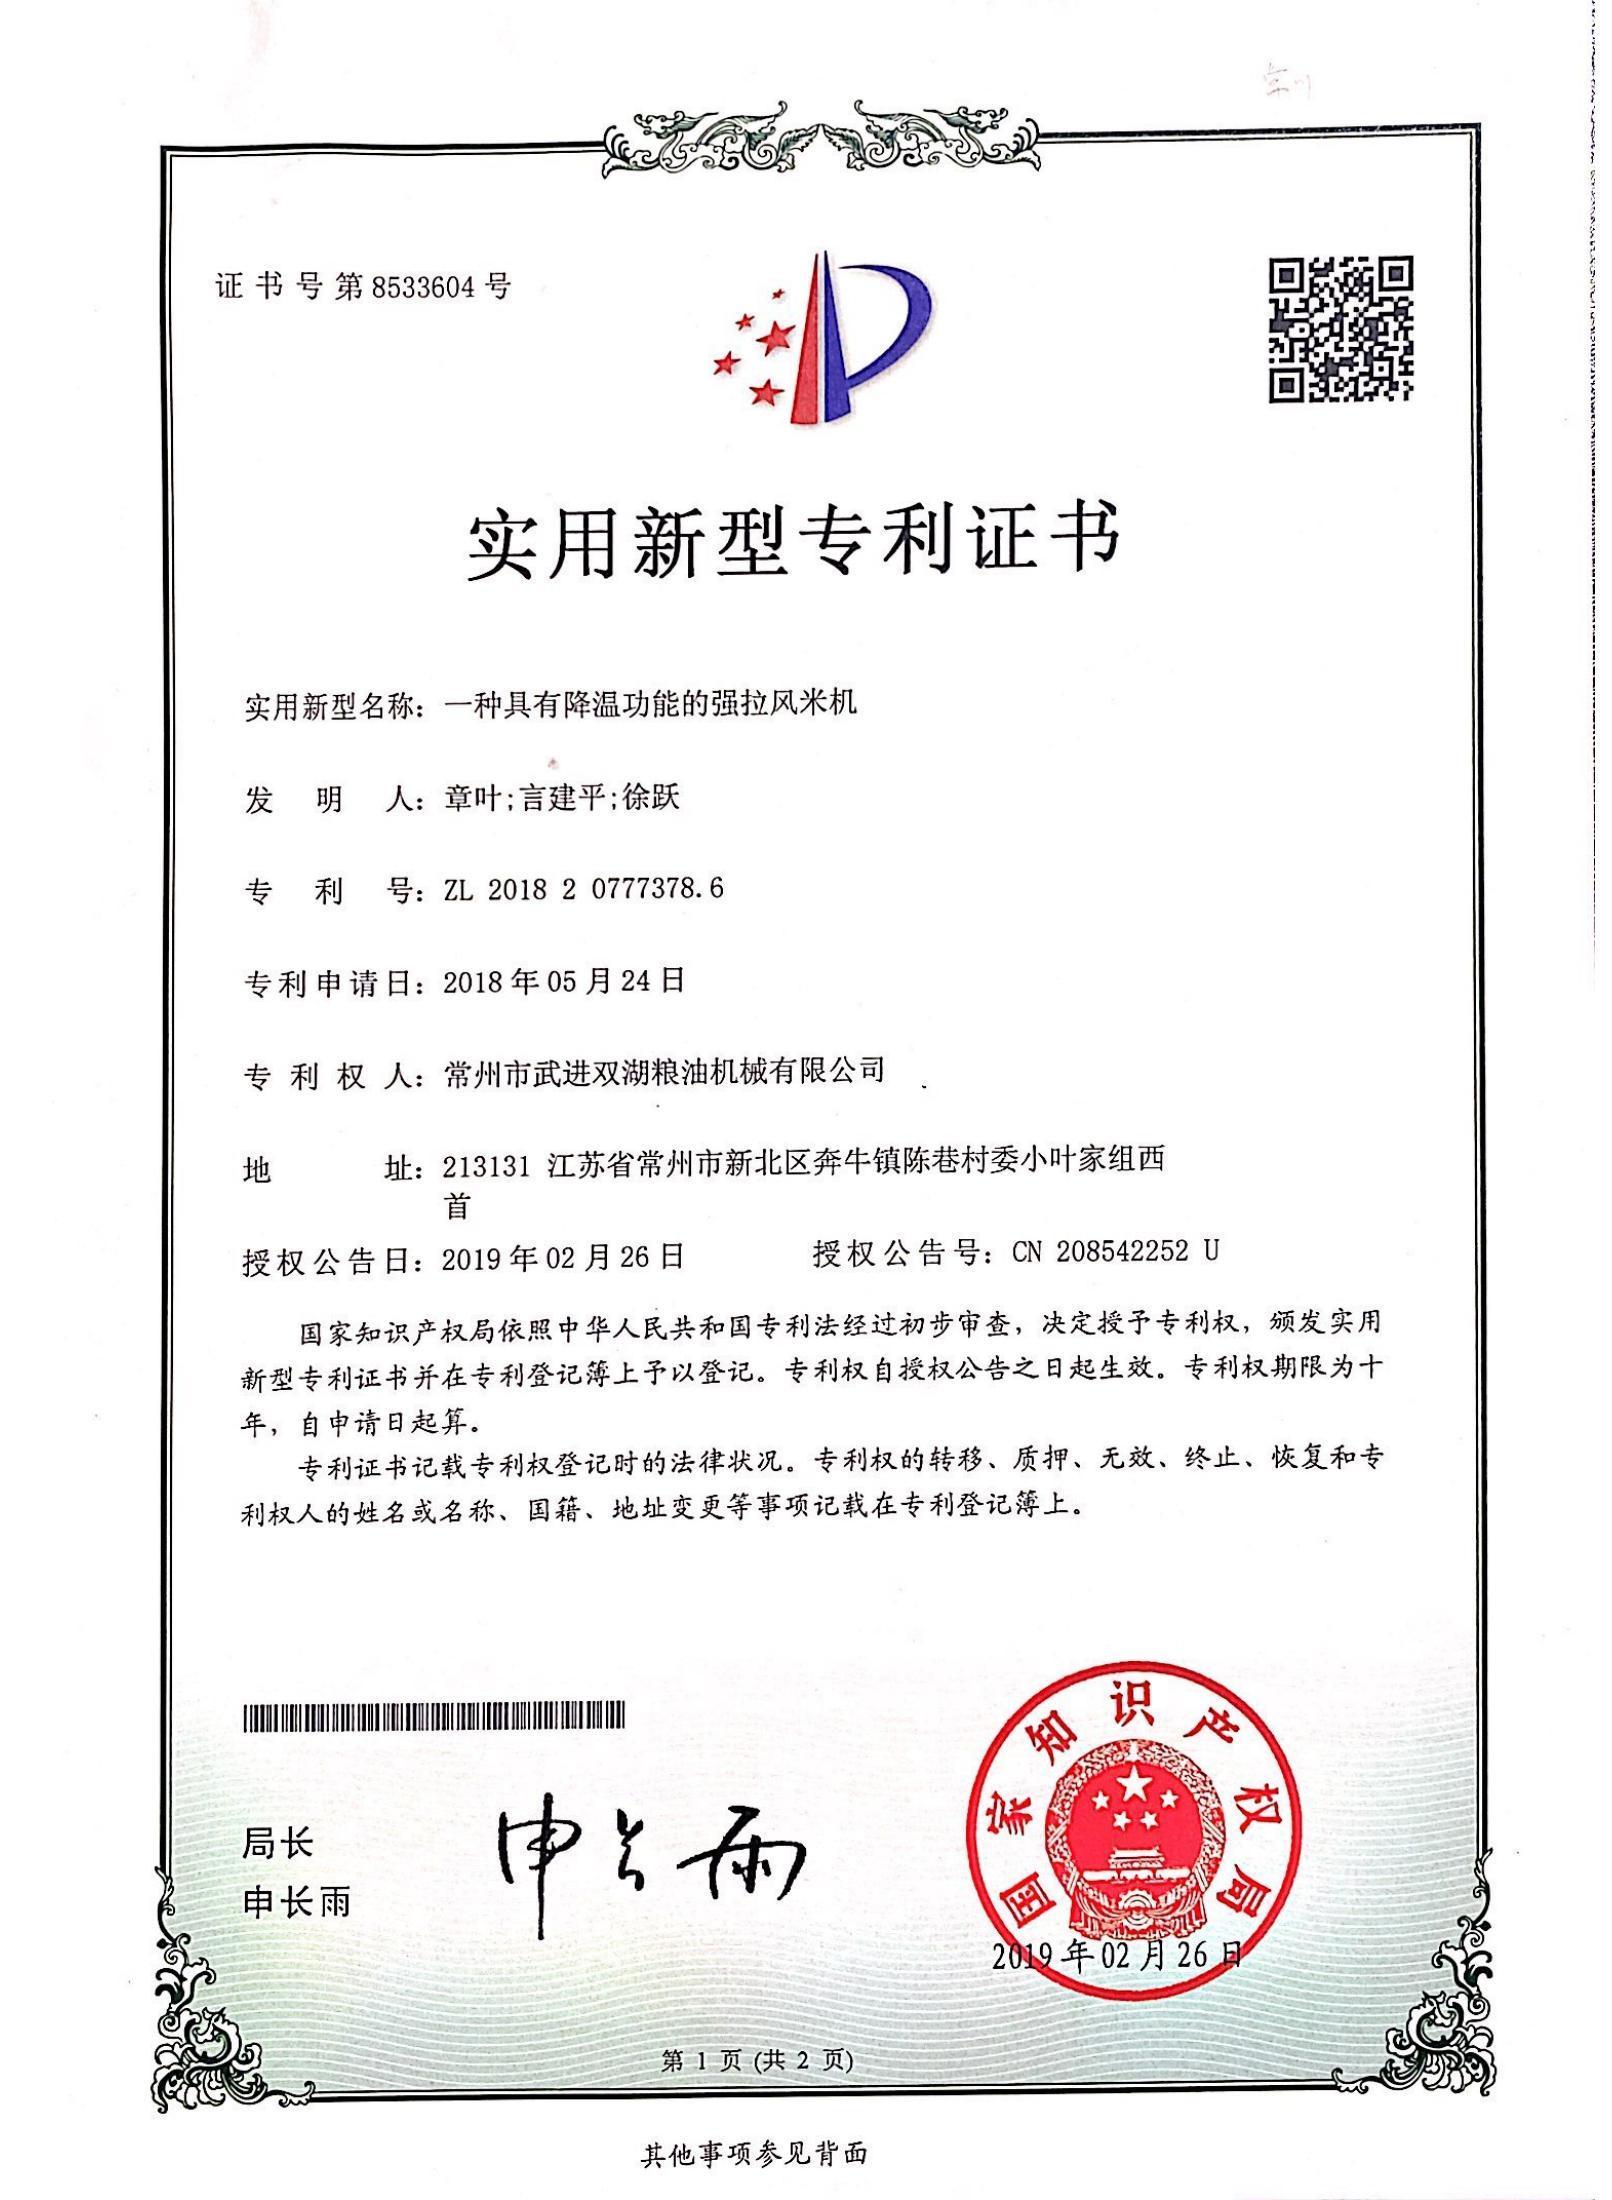 Patent certificate of strong wind-pulling rice machine with cooling function